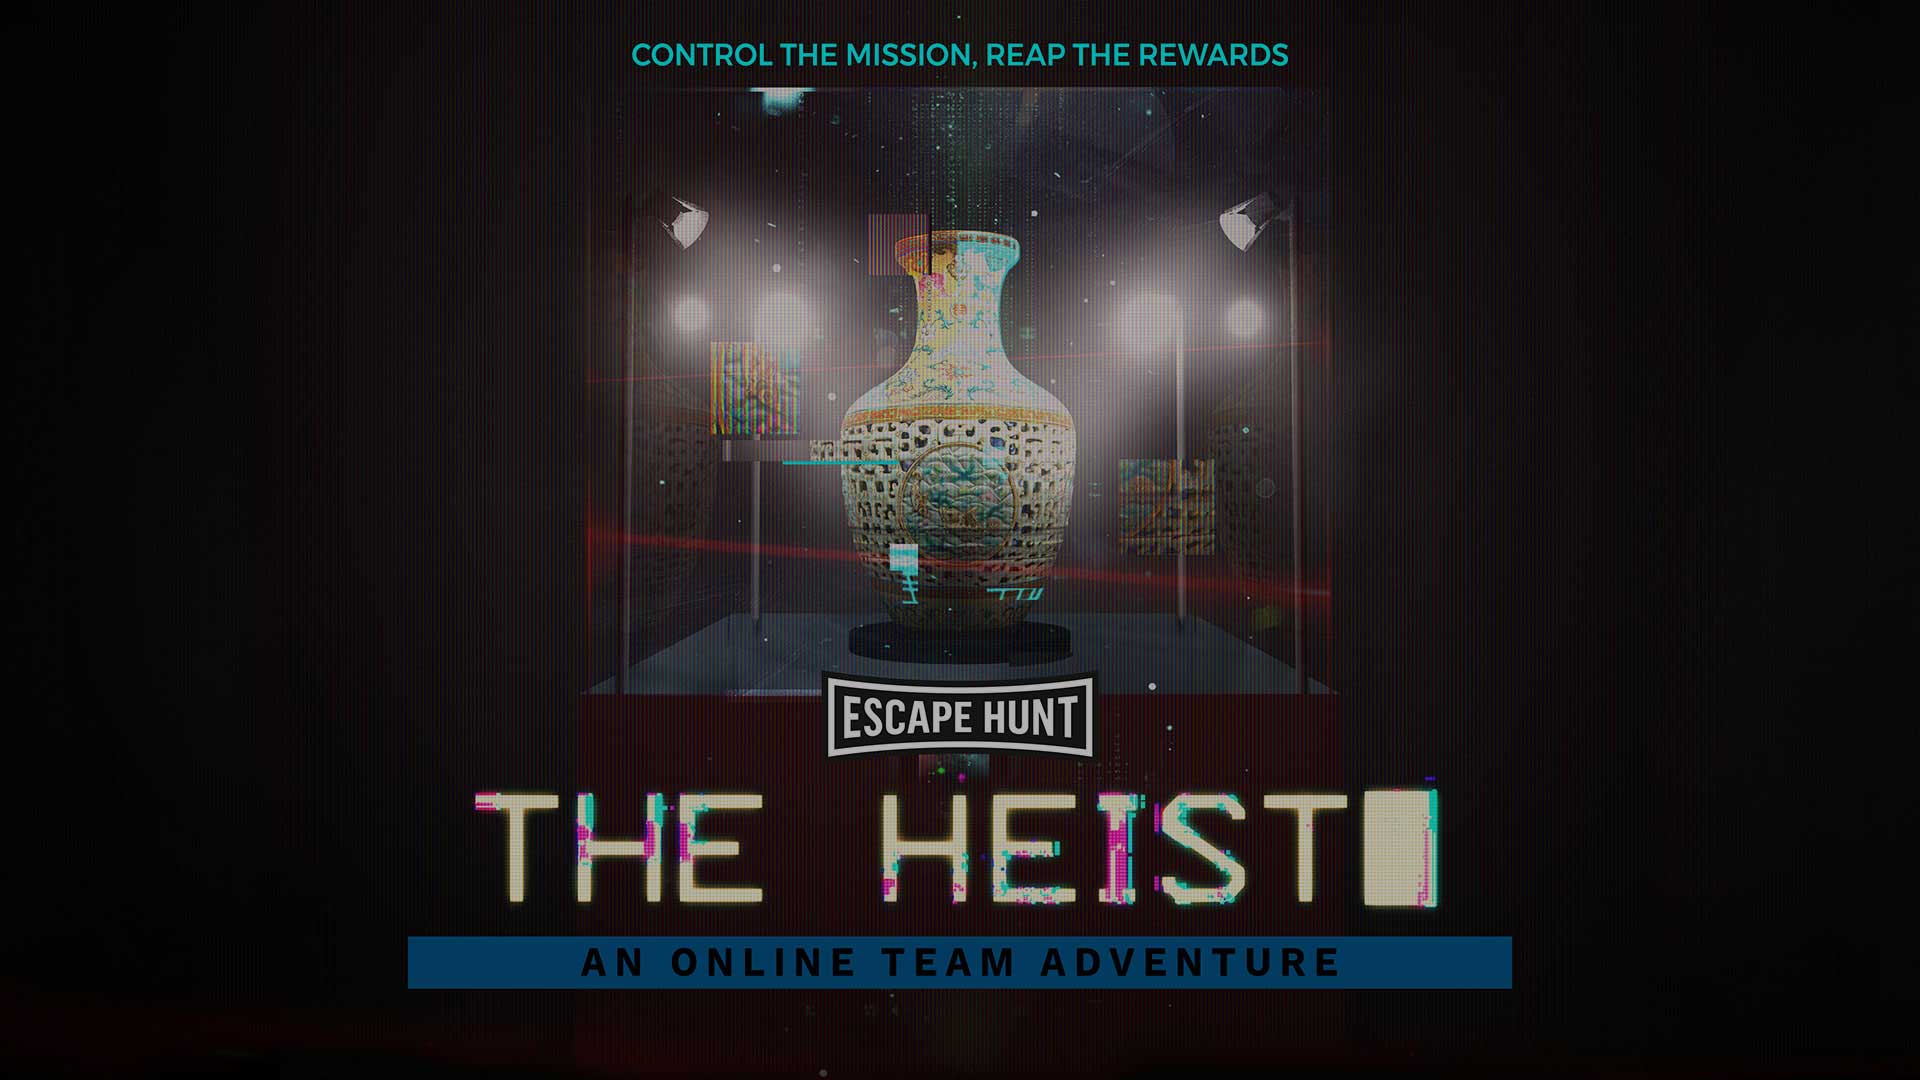 Virtual millionaire assault mission with The Heist Activity